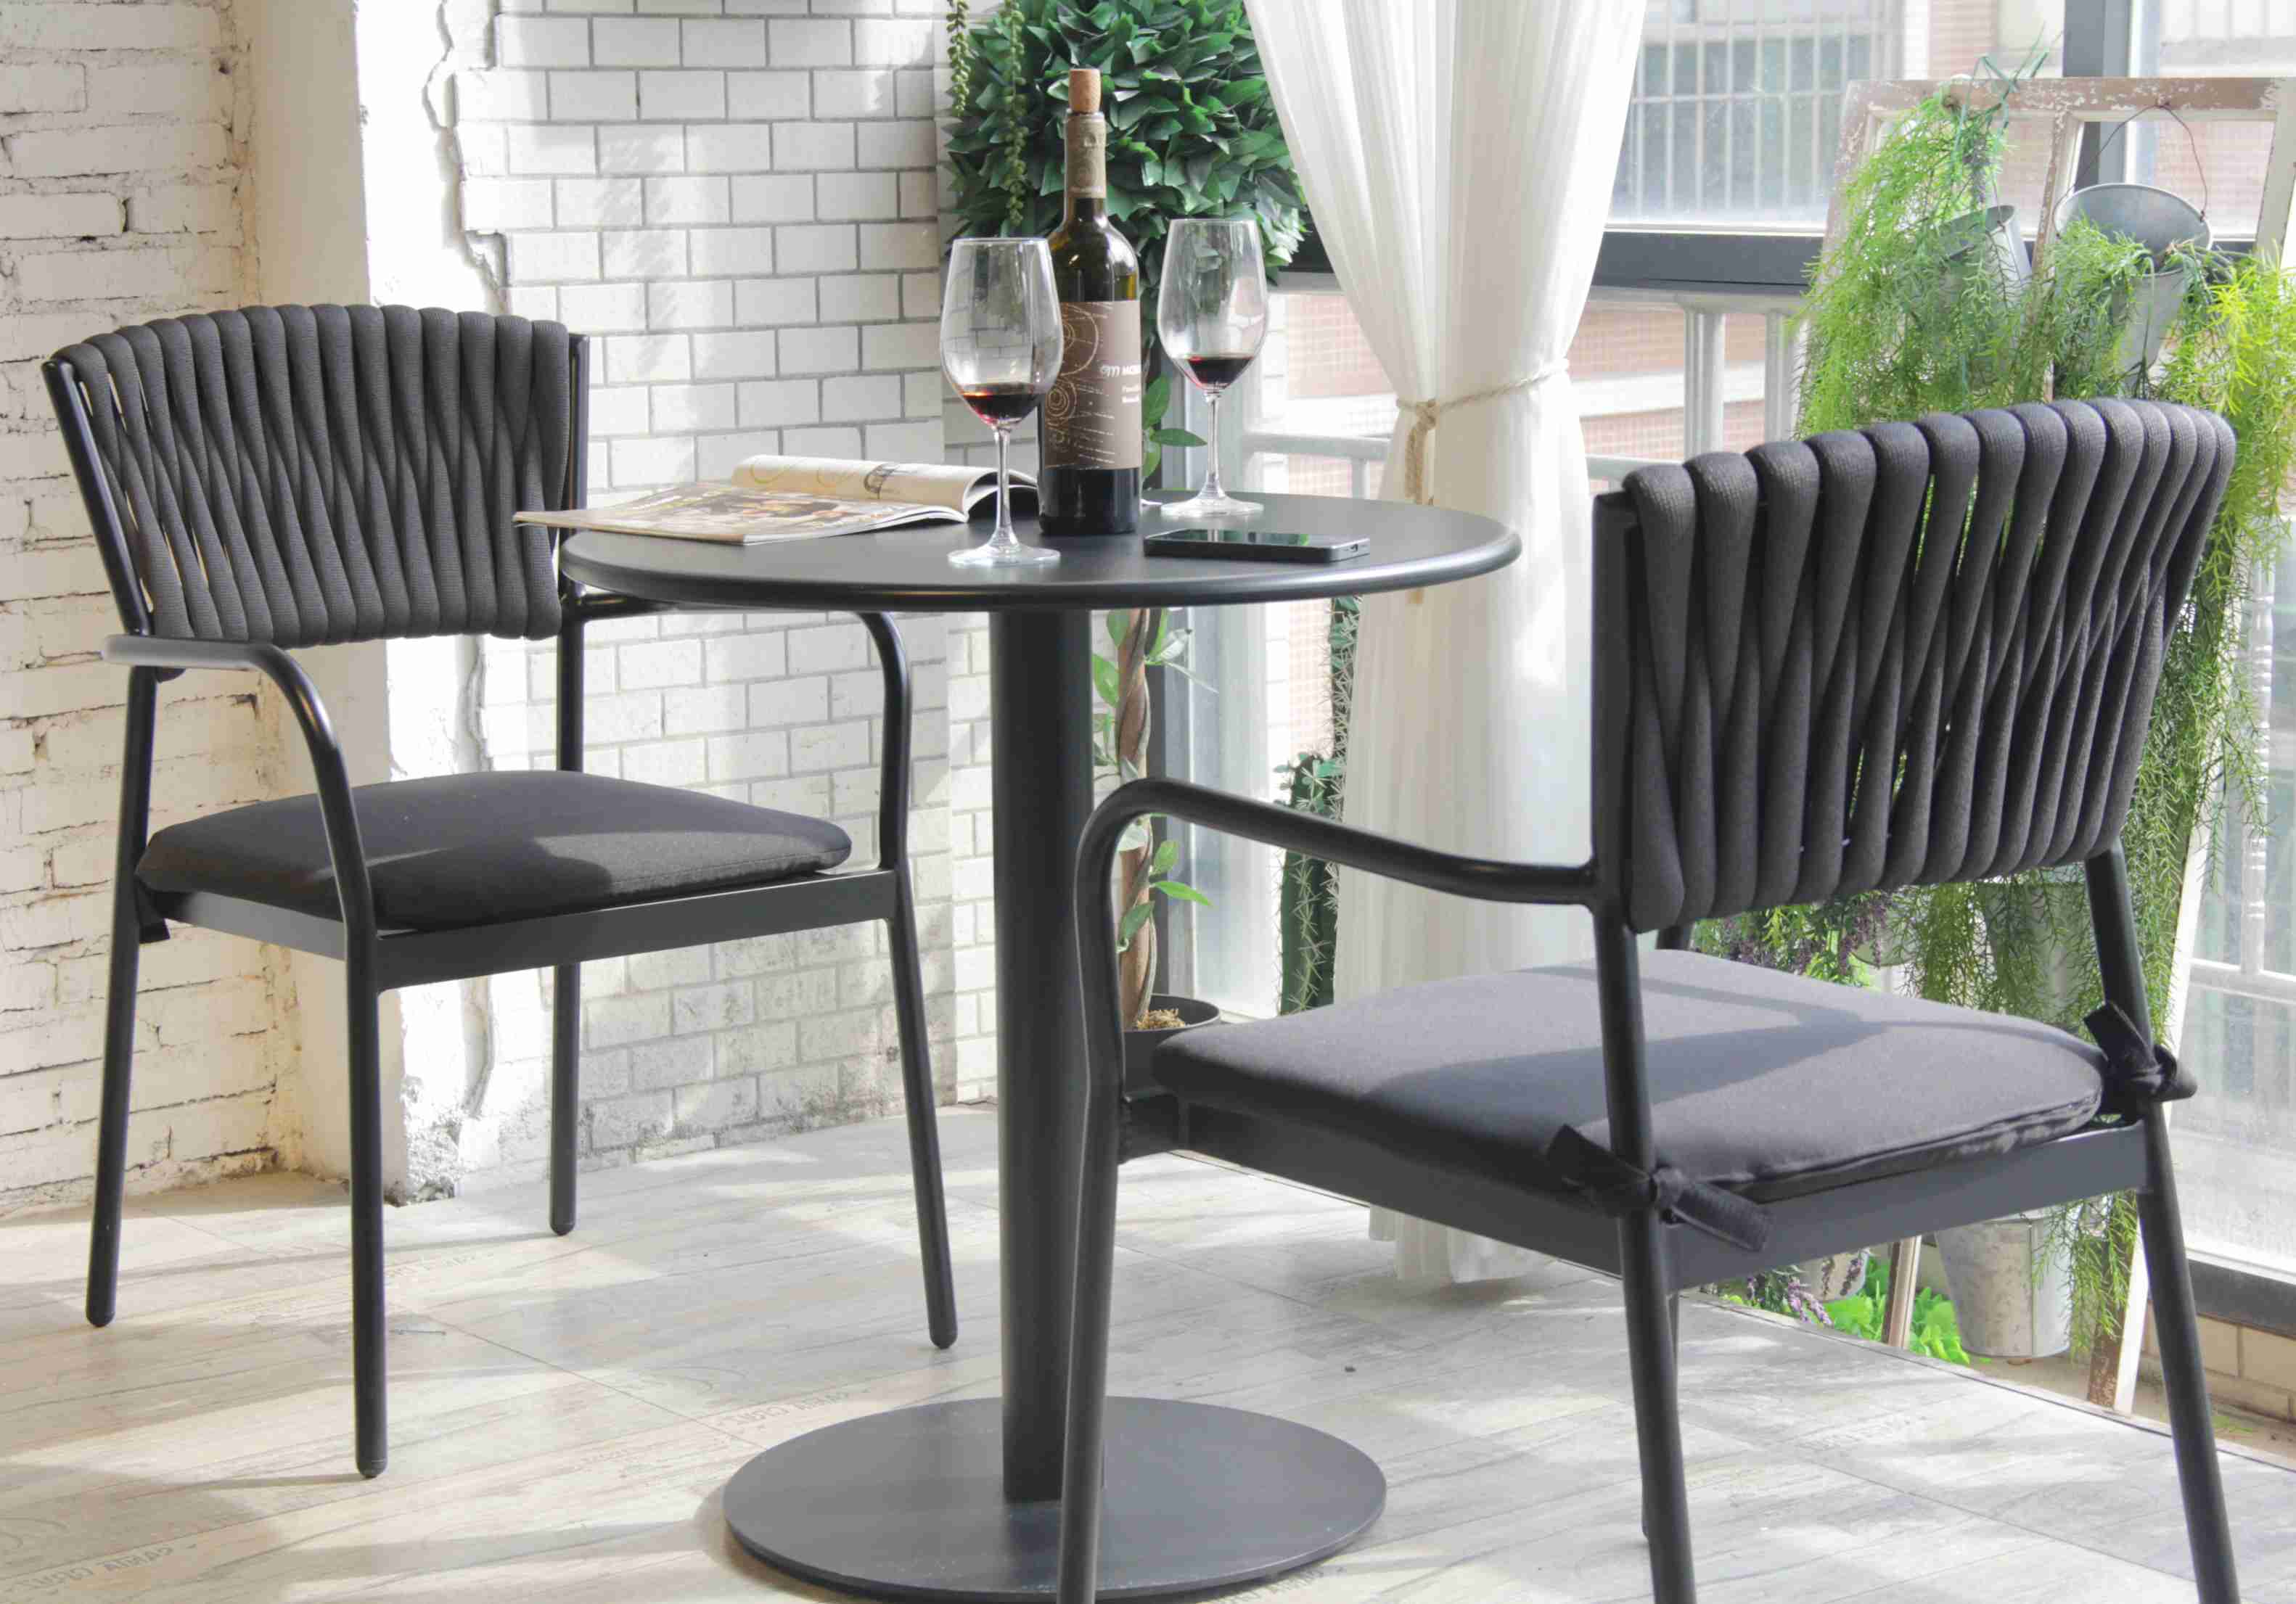 Leisure Rattan Chairs And Table